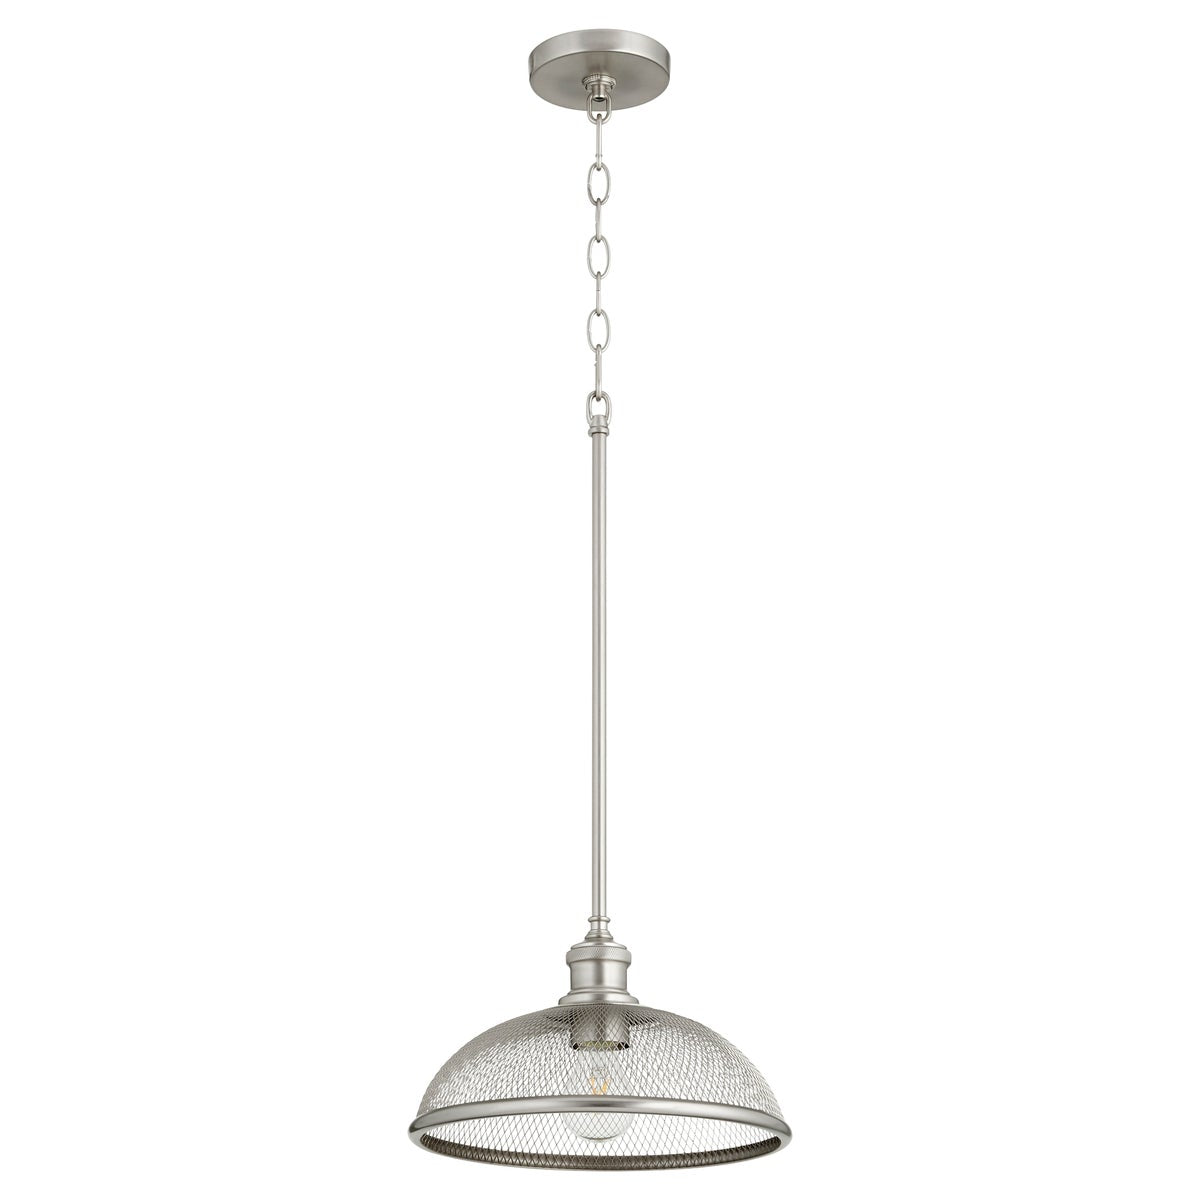 Industrial Pendant Light with mesh silhouette and crisscross patterns, showcasing subtle shaded bulbs. Versatile transitional styling for contemporary and traditional settings. Quorum International brand. 100W, 1-bulb fixture. 12"W x 7.25"H. UL Listed, Damp Location safety rating. 2-year warranty.